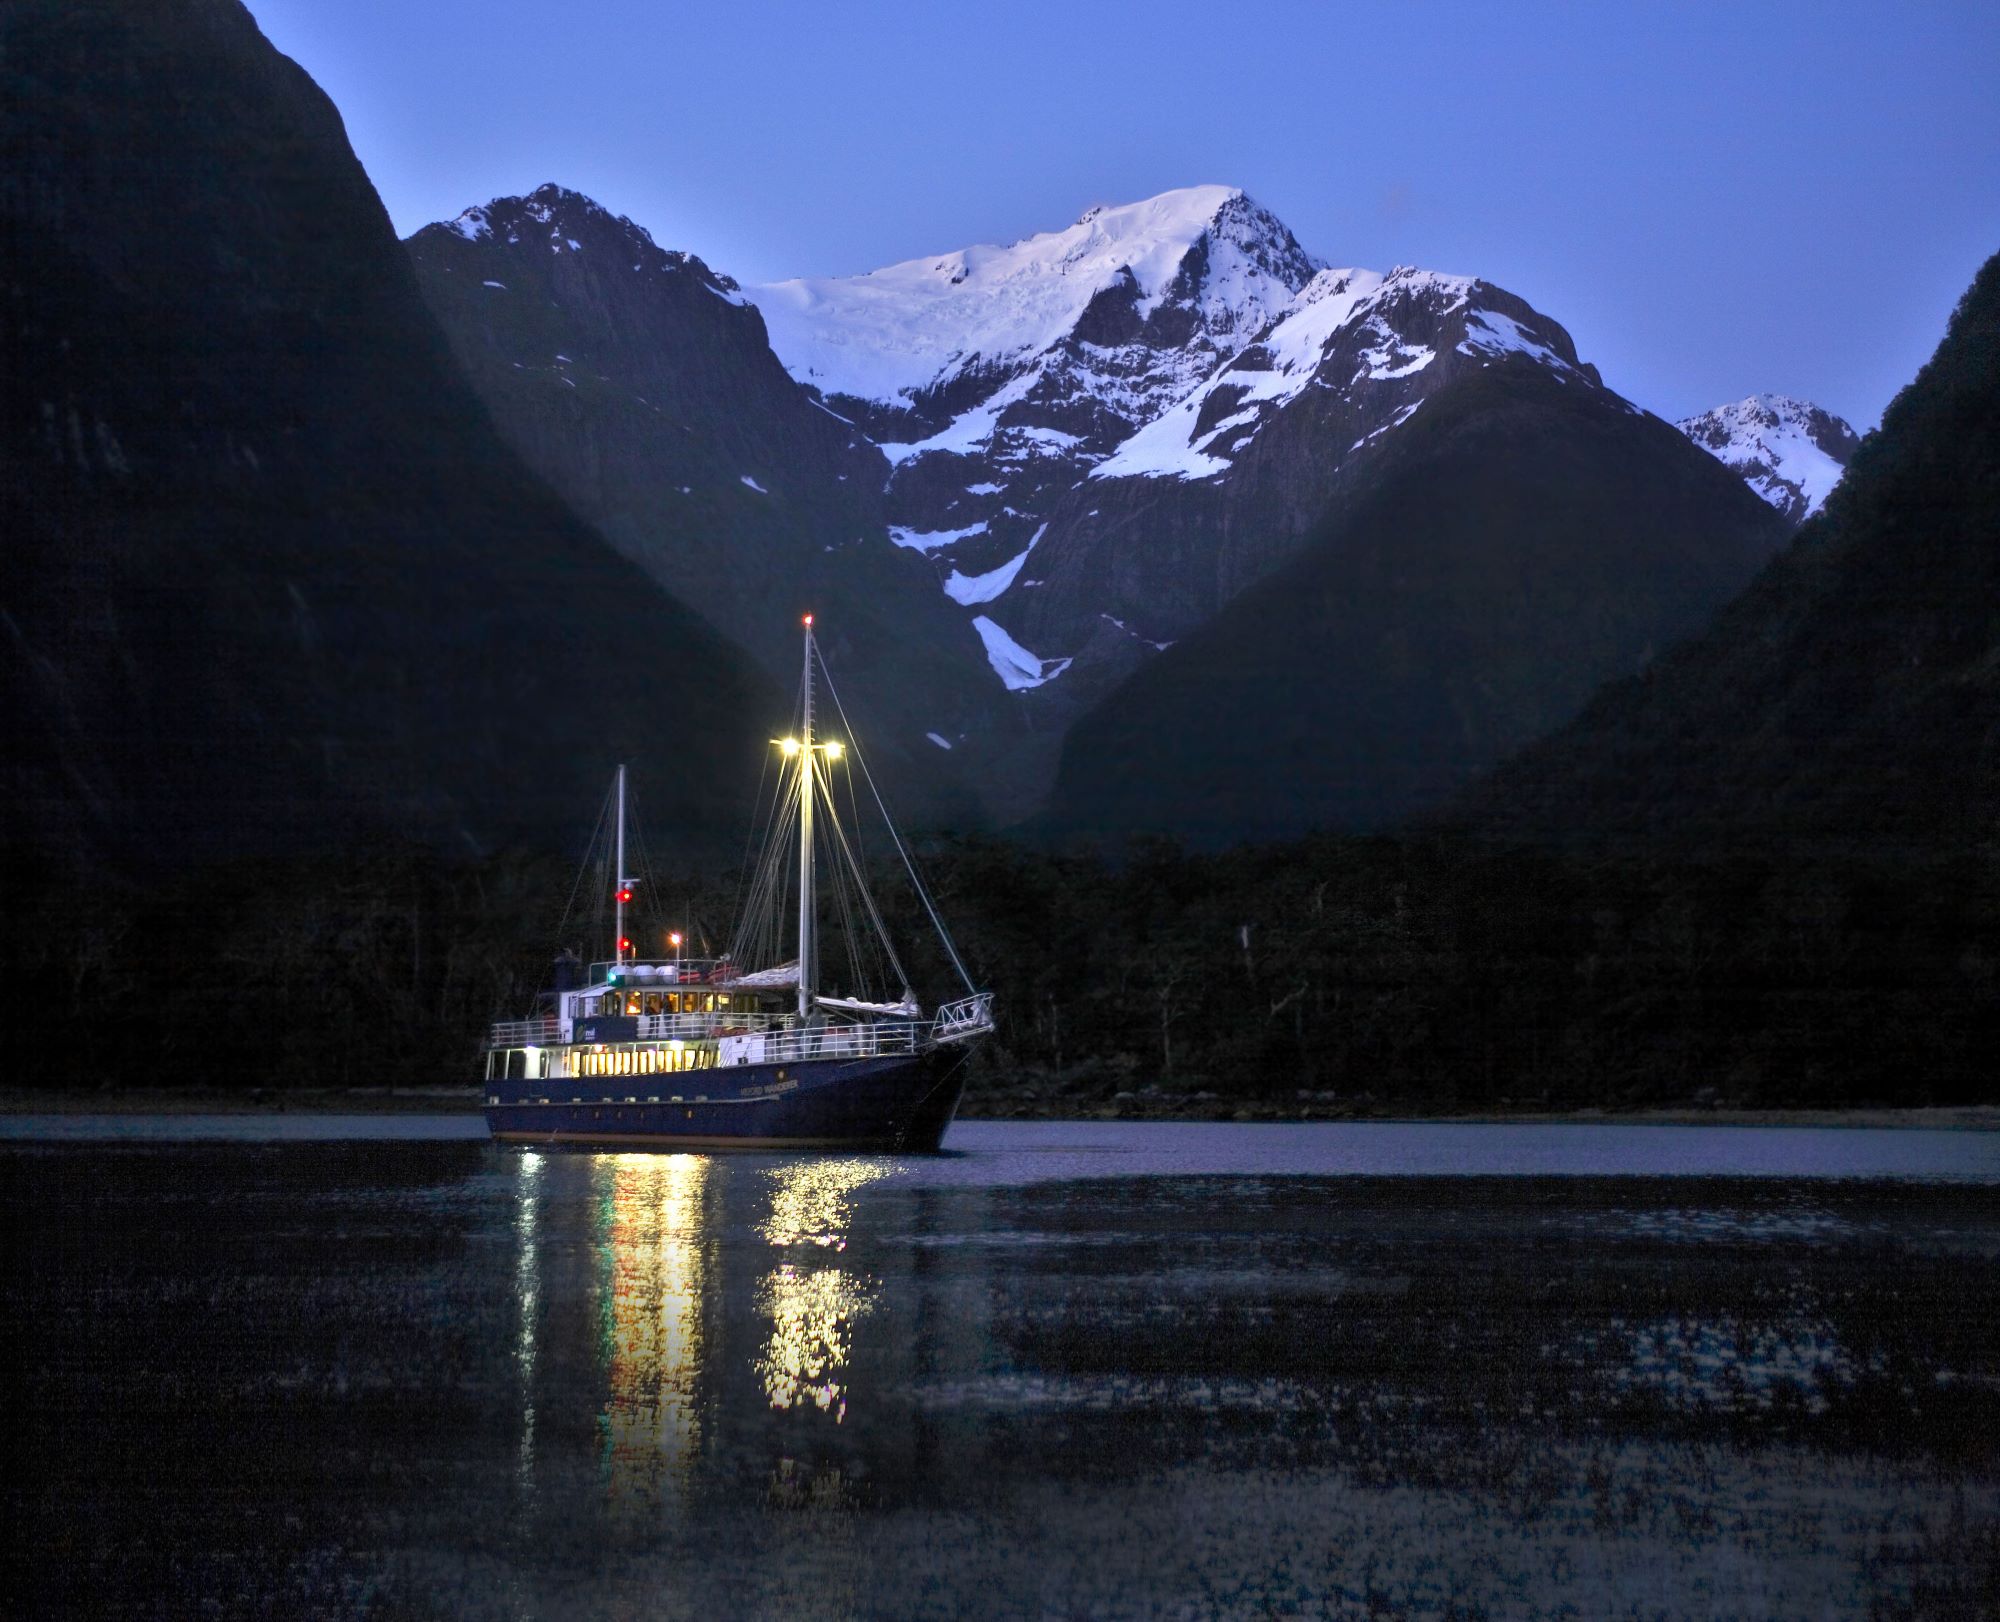 Boat on Milford Sound at night